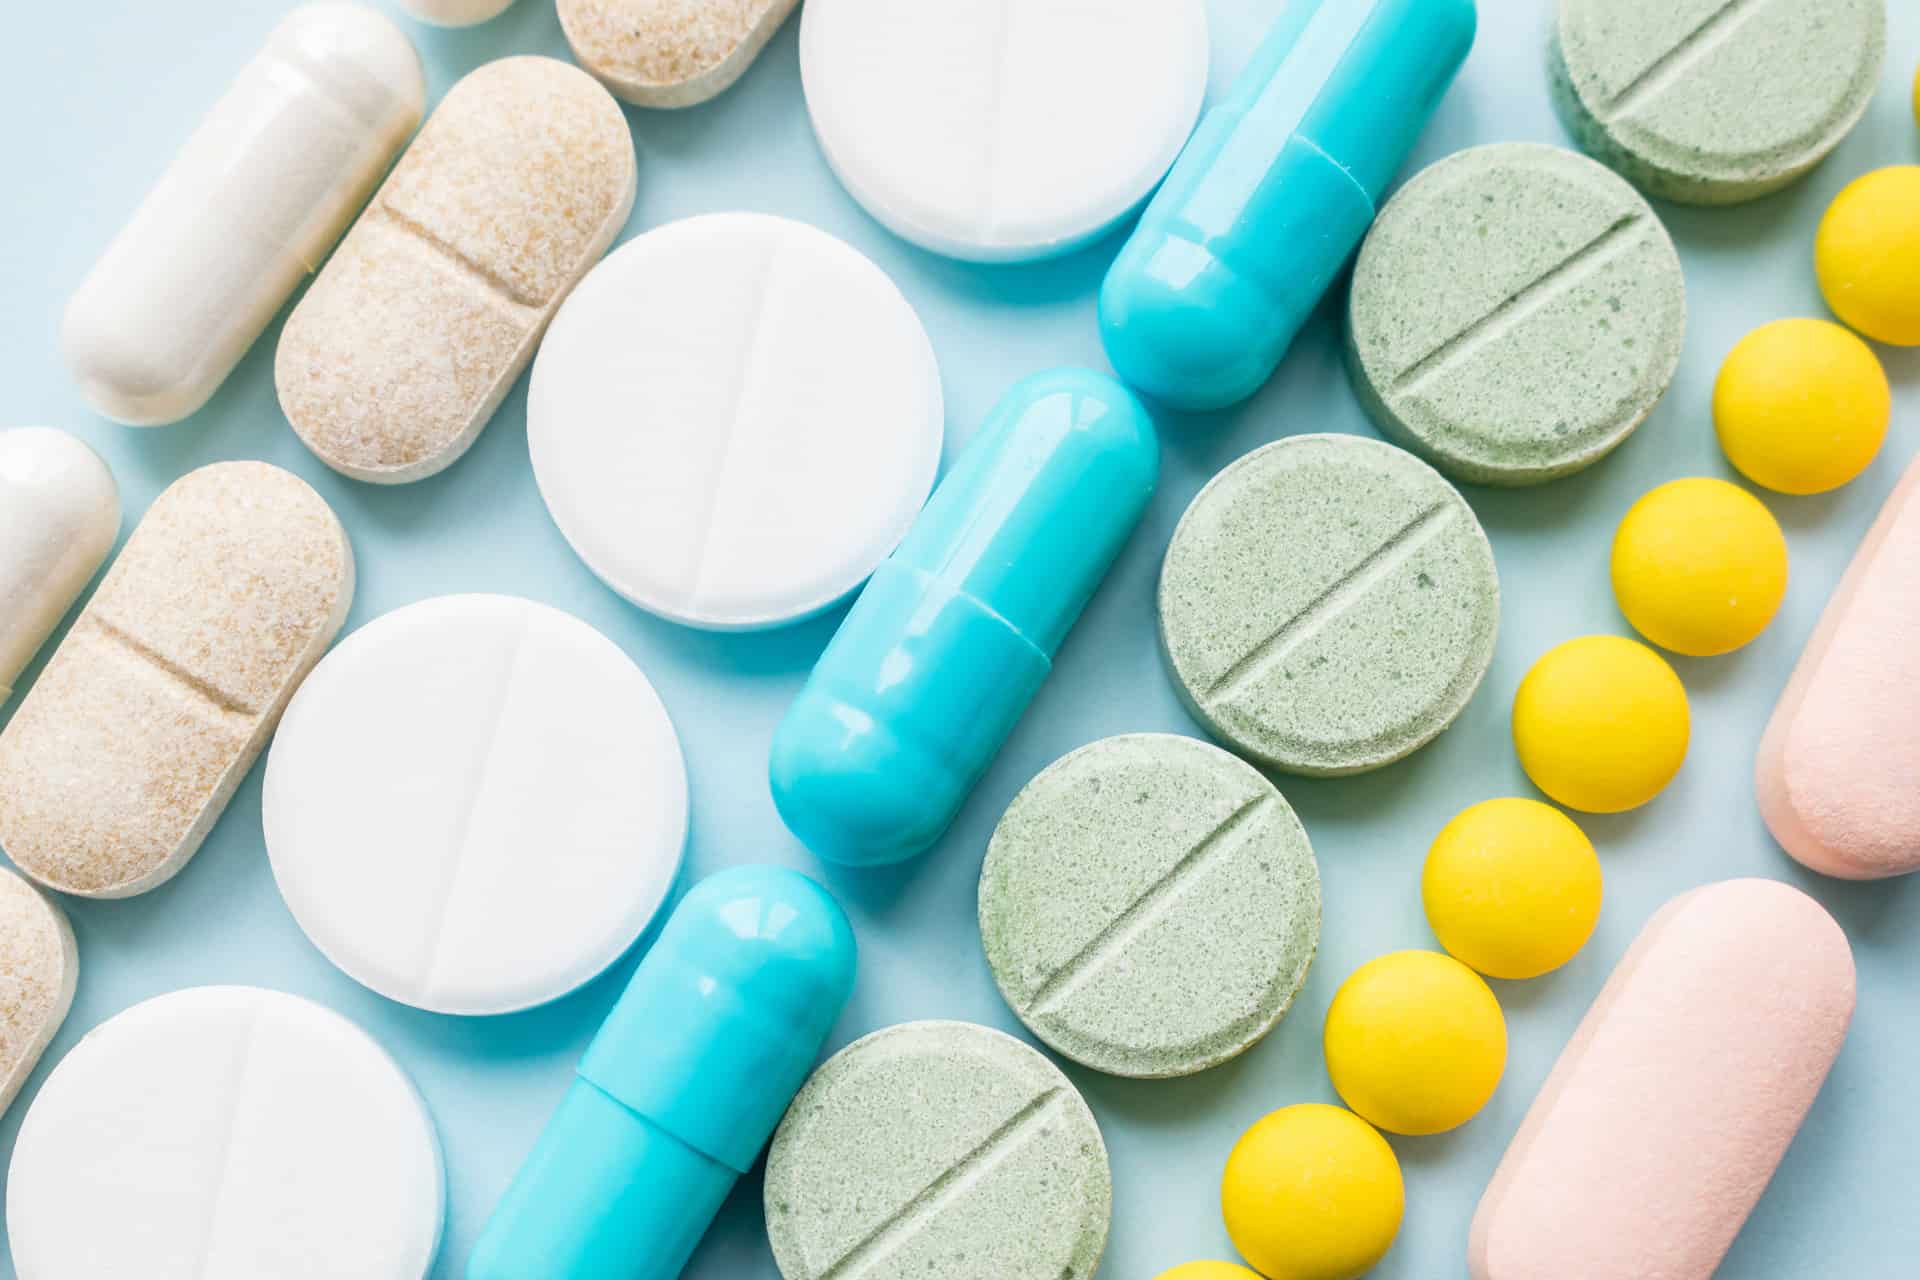 Overcoming Opioids: The Benefits Of Medication-Assisted Treatment (MAT)